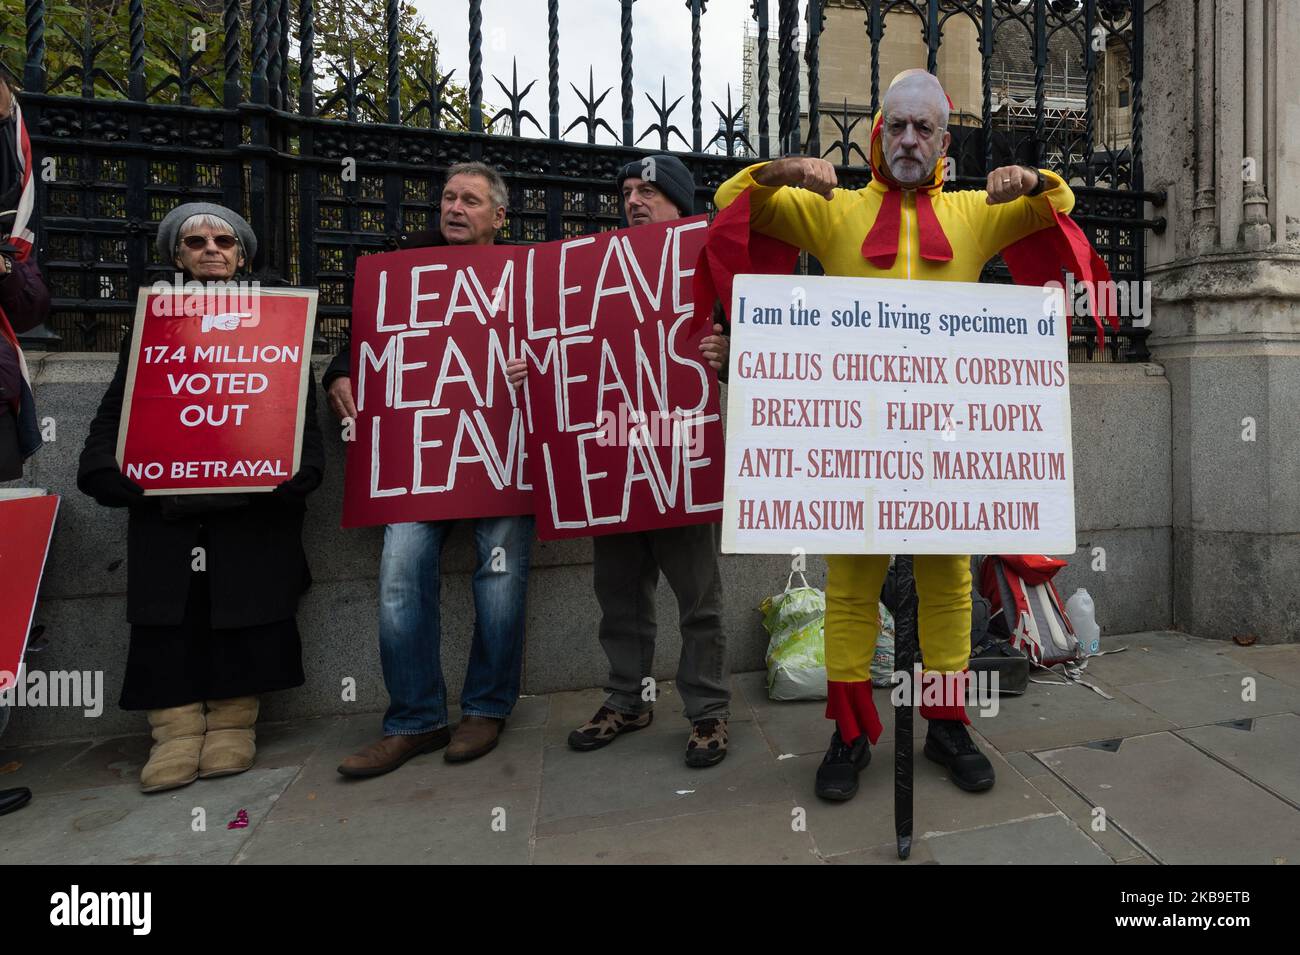 A pro-Brexit demonstrator dressed in a chicken suit and wearing a mask of Labour Party's leader Jeremy Corbyn protest outside the Houses of Parliament on 28 October, 2019 in London, England. Today MPs debate and vote on a government's motion calling for a General Election to take place on 12 December 2019. The European Union granted a Brexit etension until 31 January 2020 with an option for the UK to leave earlier if a deal is ratified. (Photo by WIktor Szymanowicz/NurPhoto) Stock Photo